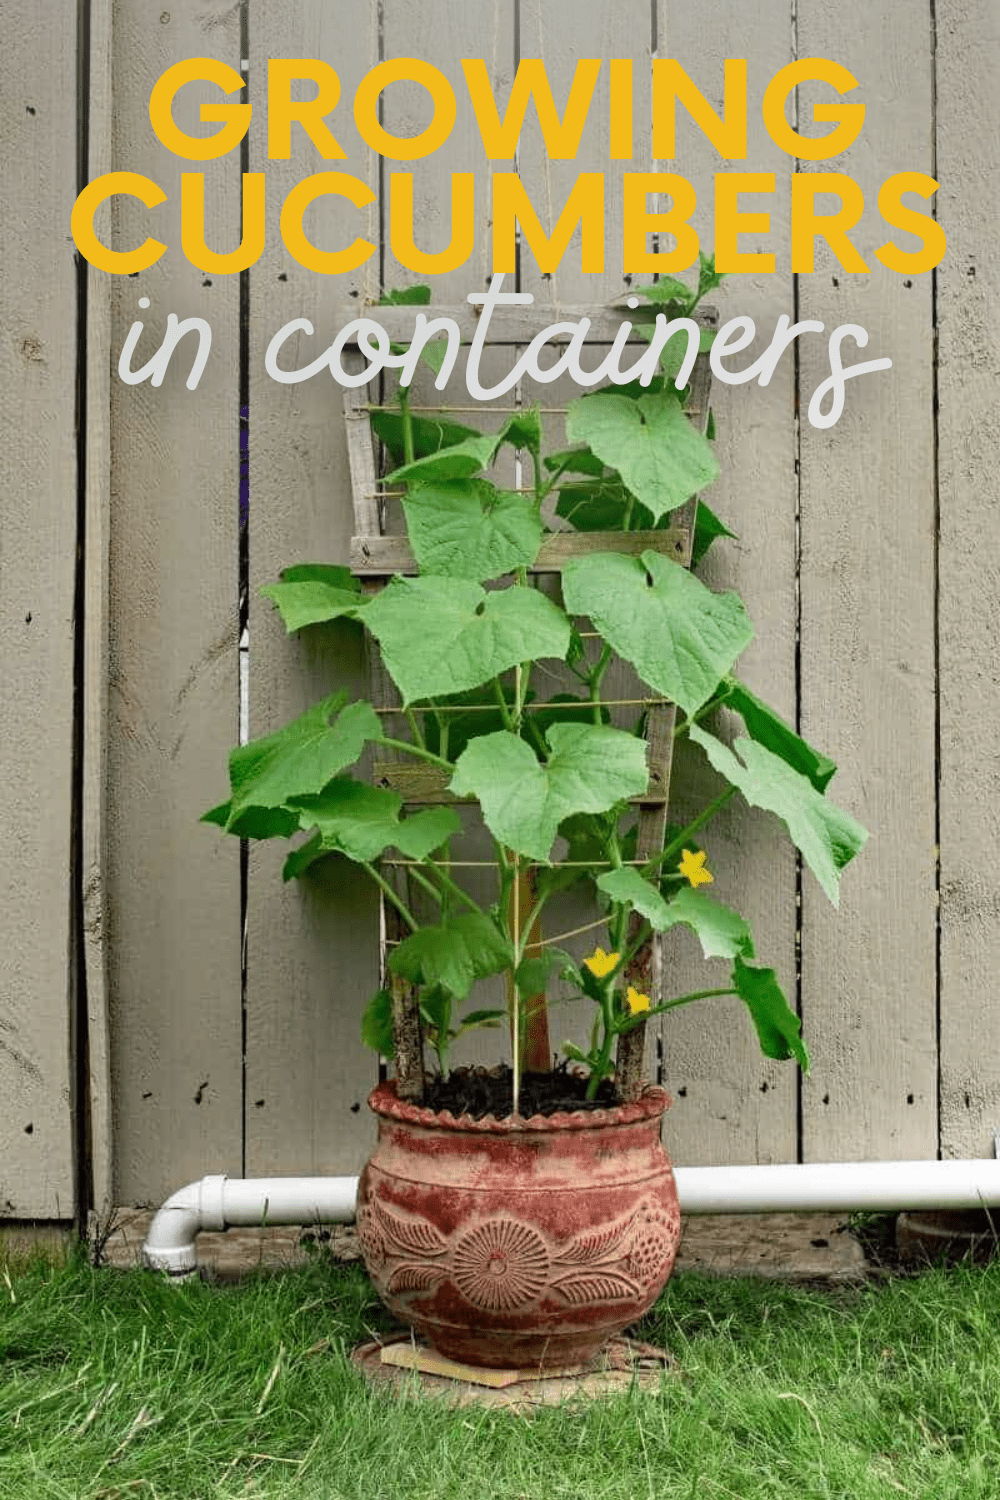 Growing Cucumbers in a Pot